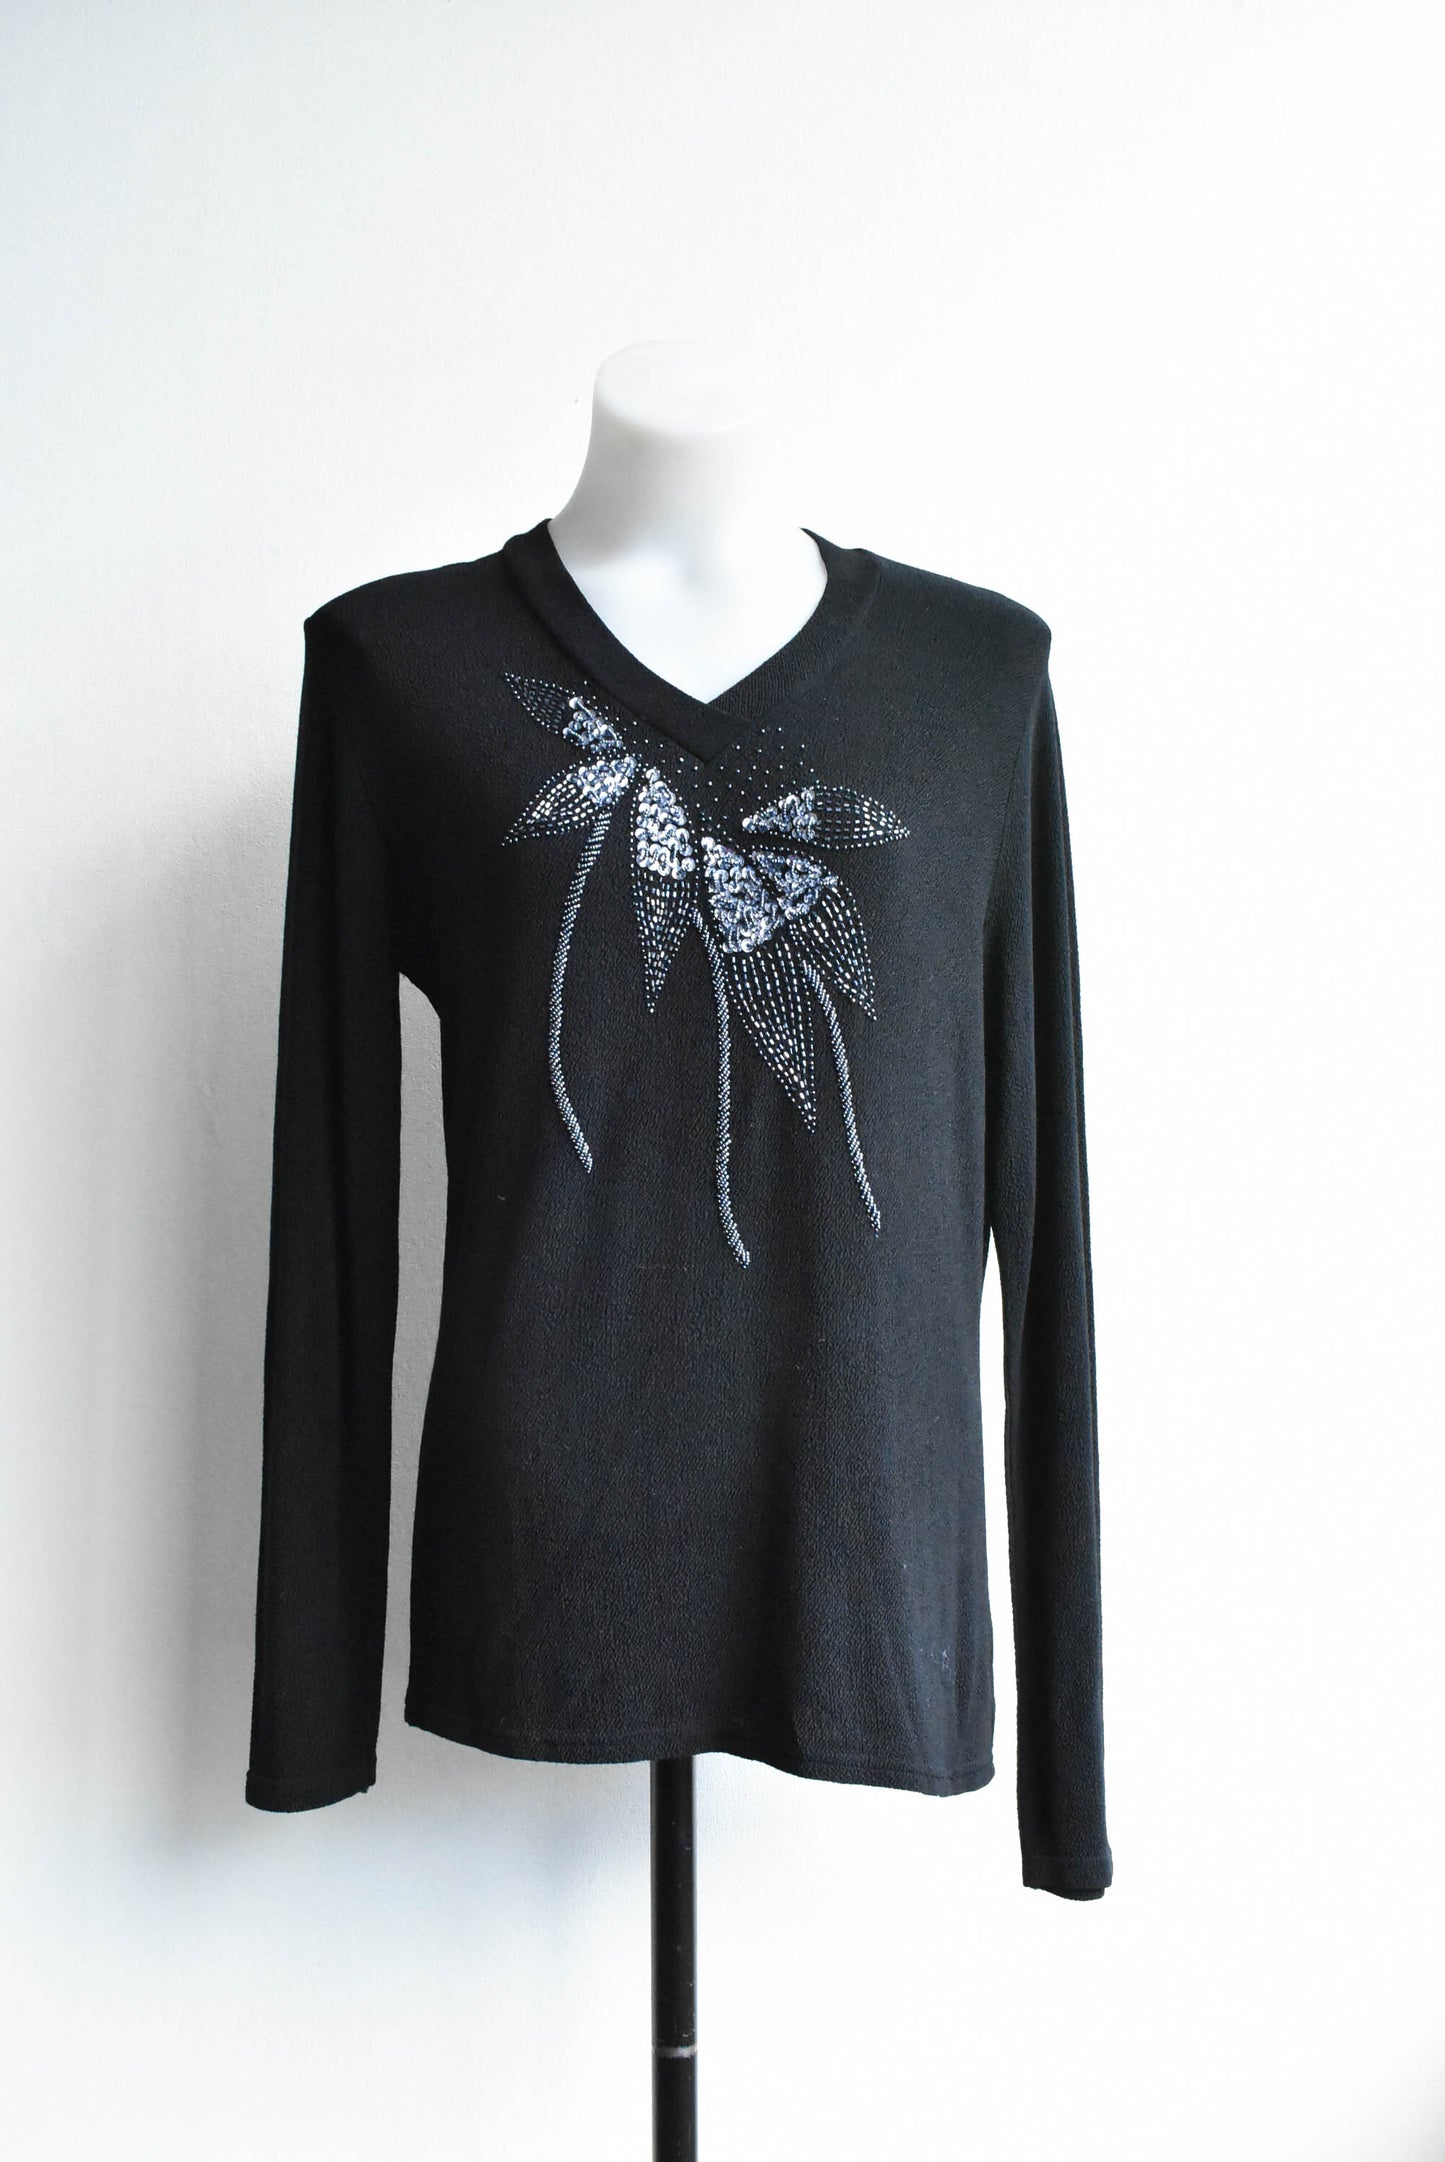 Silk and cotton blend beaded long sleeve top, size S